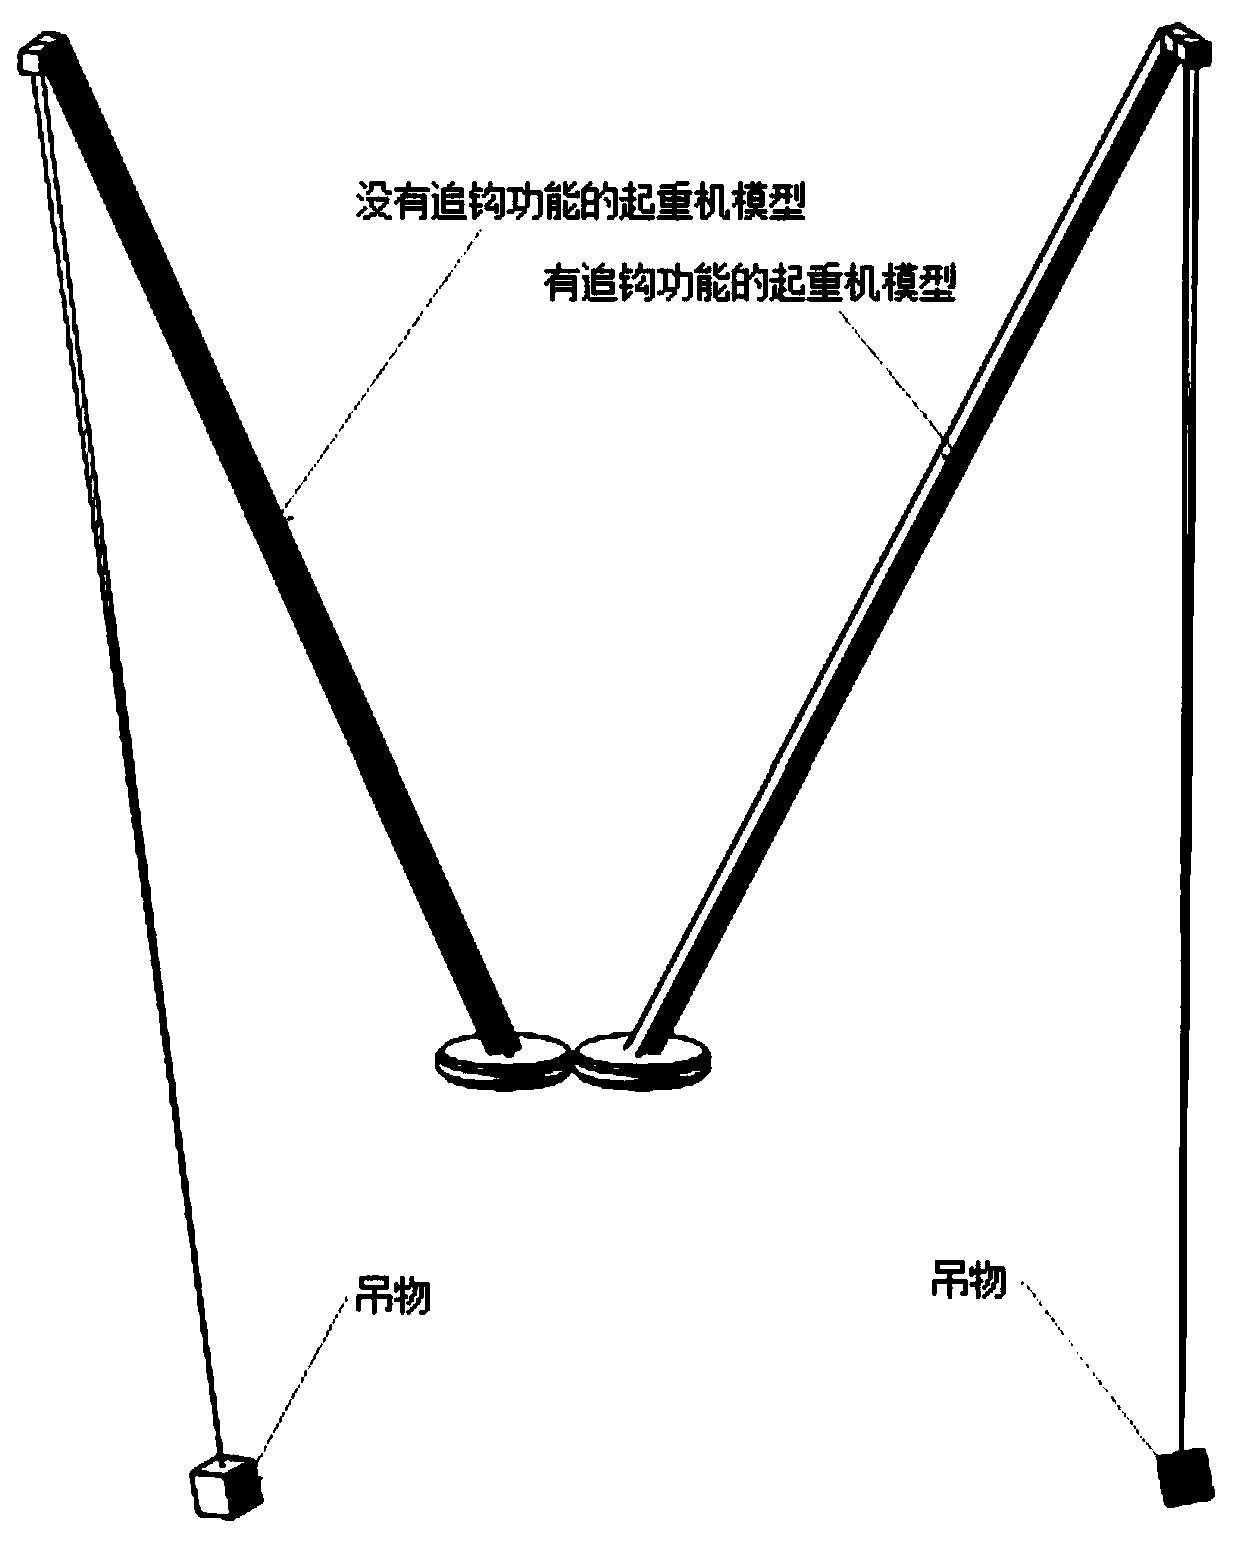 Computer control method for hook stabilizing of crane and crane